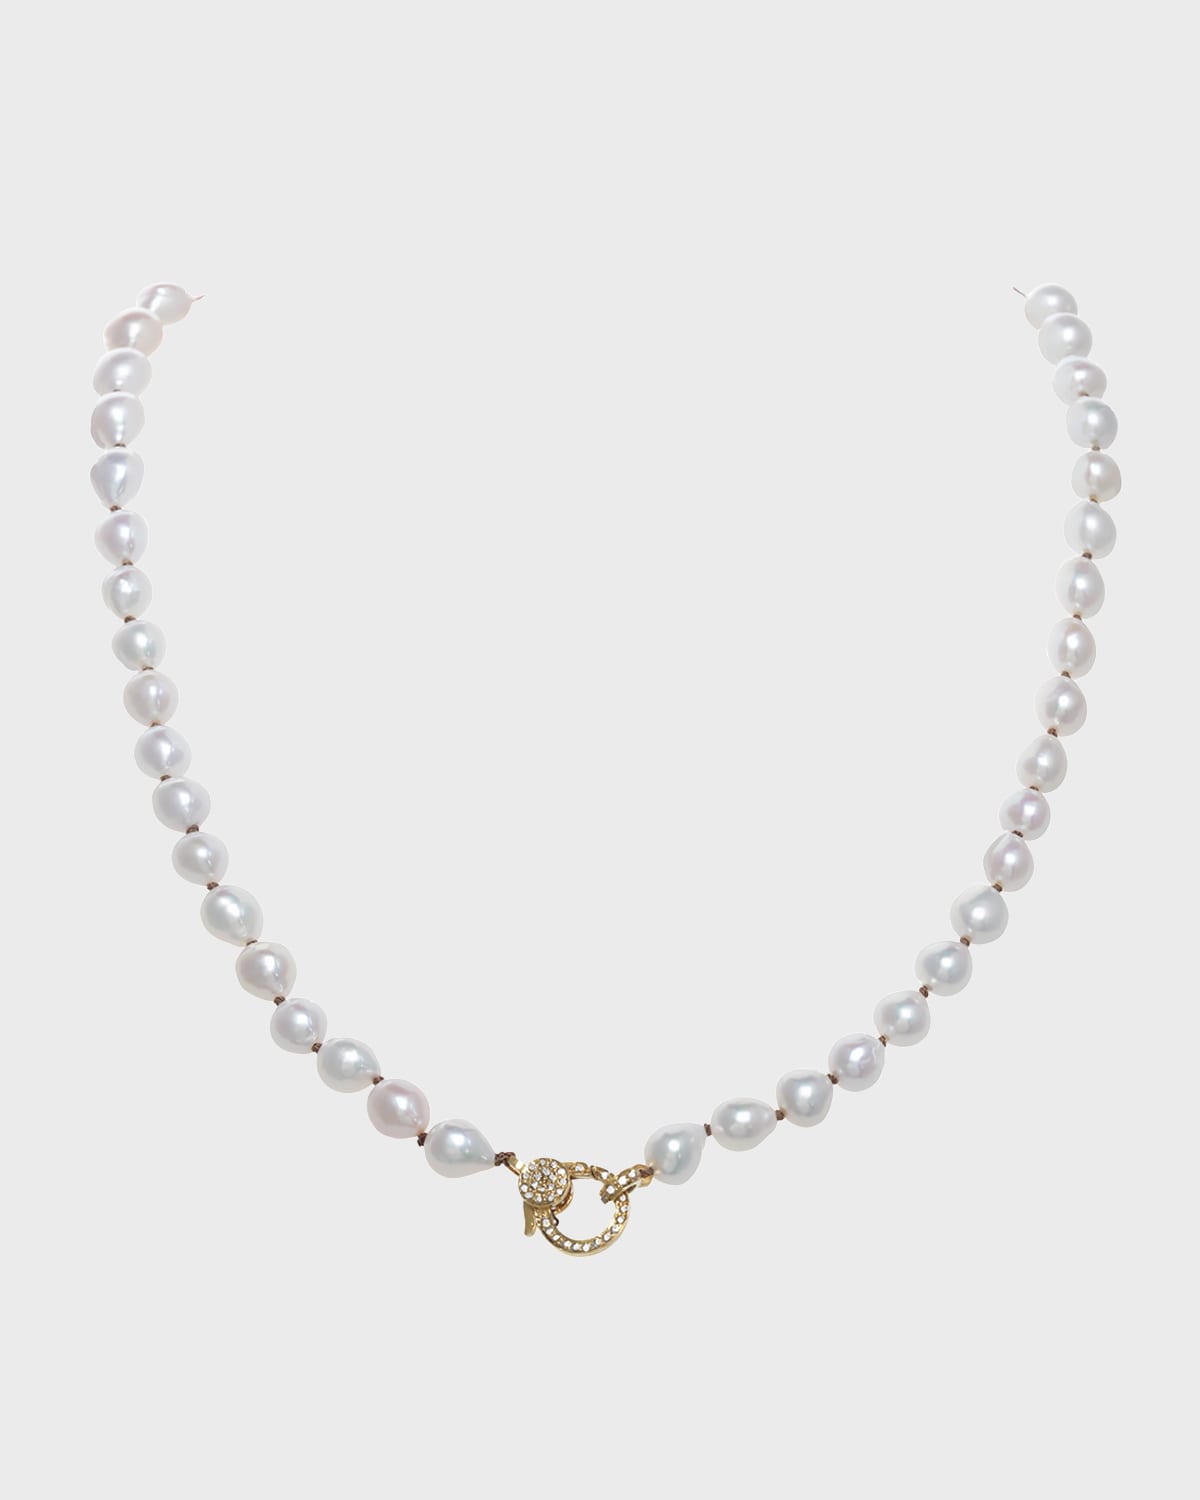 Margo Morrison Petite Baroque Pearl Necklace With Vermeil Diamond Clasp, 7-8 Mm 18"l In White